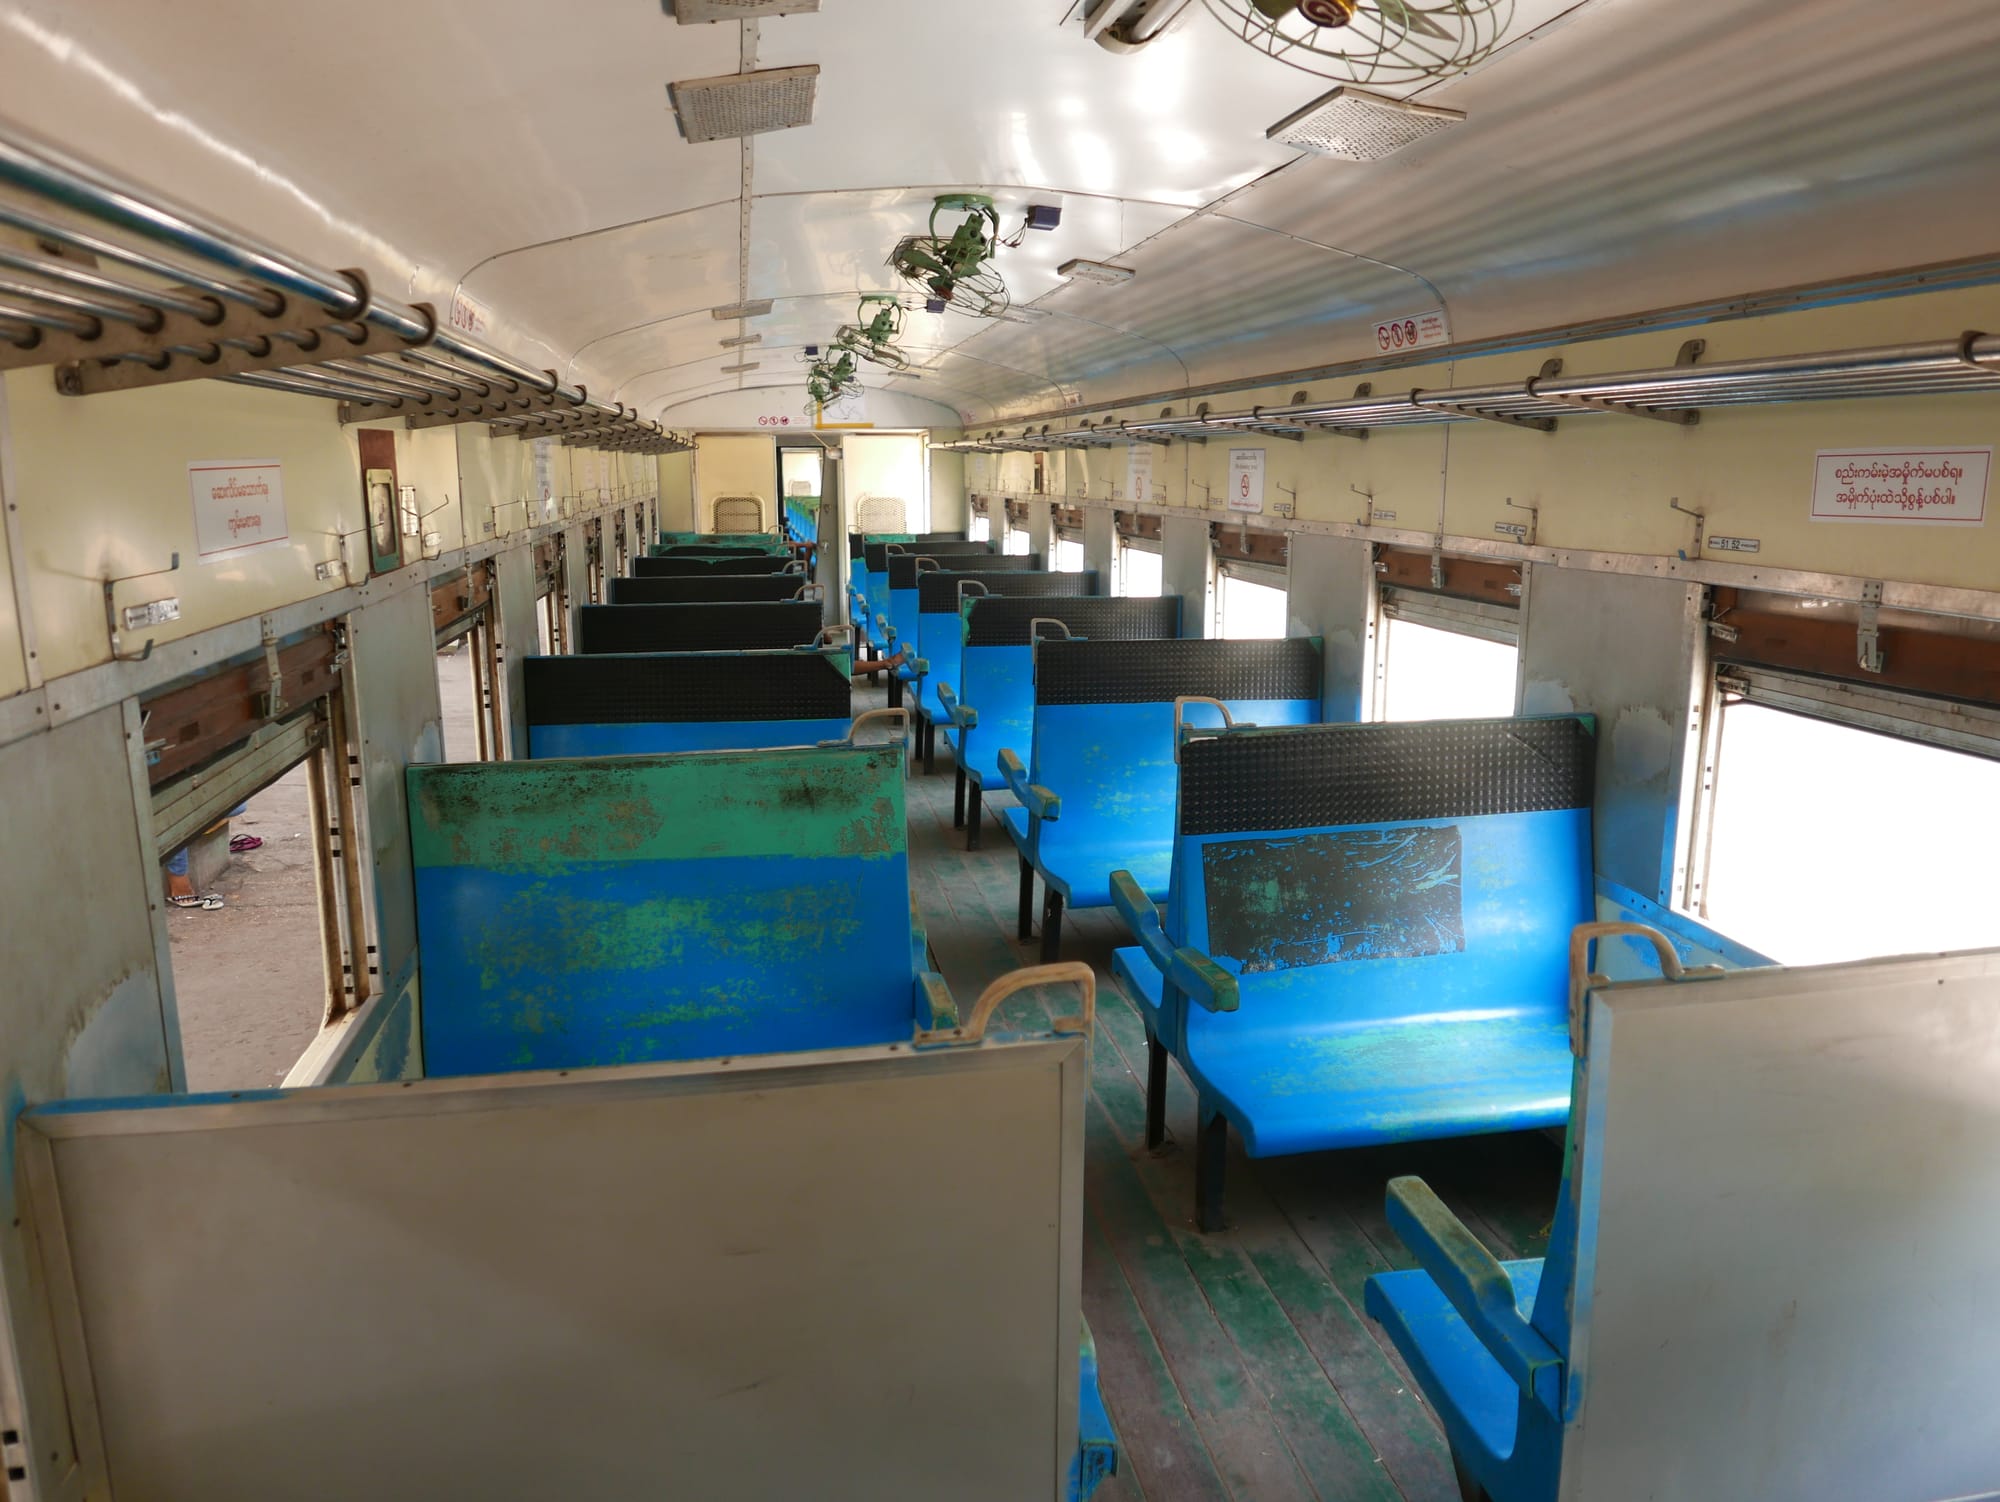 Photo by Author — the interior of the train — Yangon Train Station